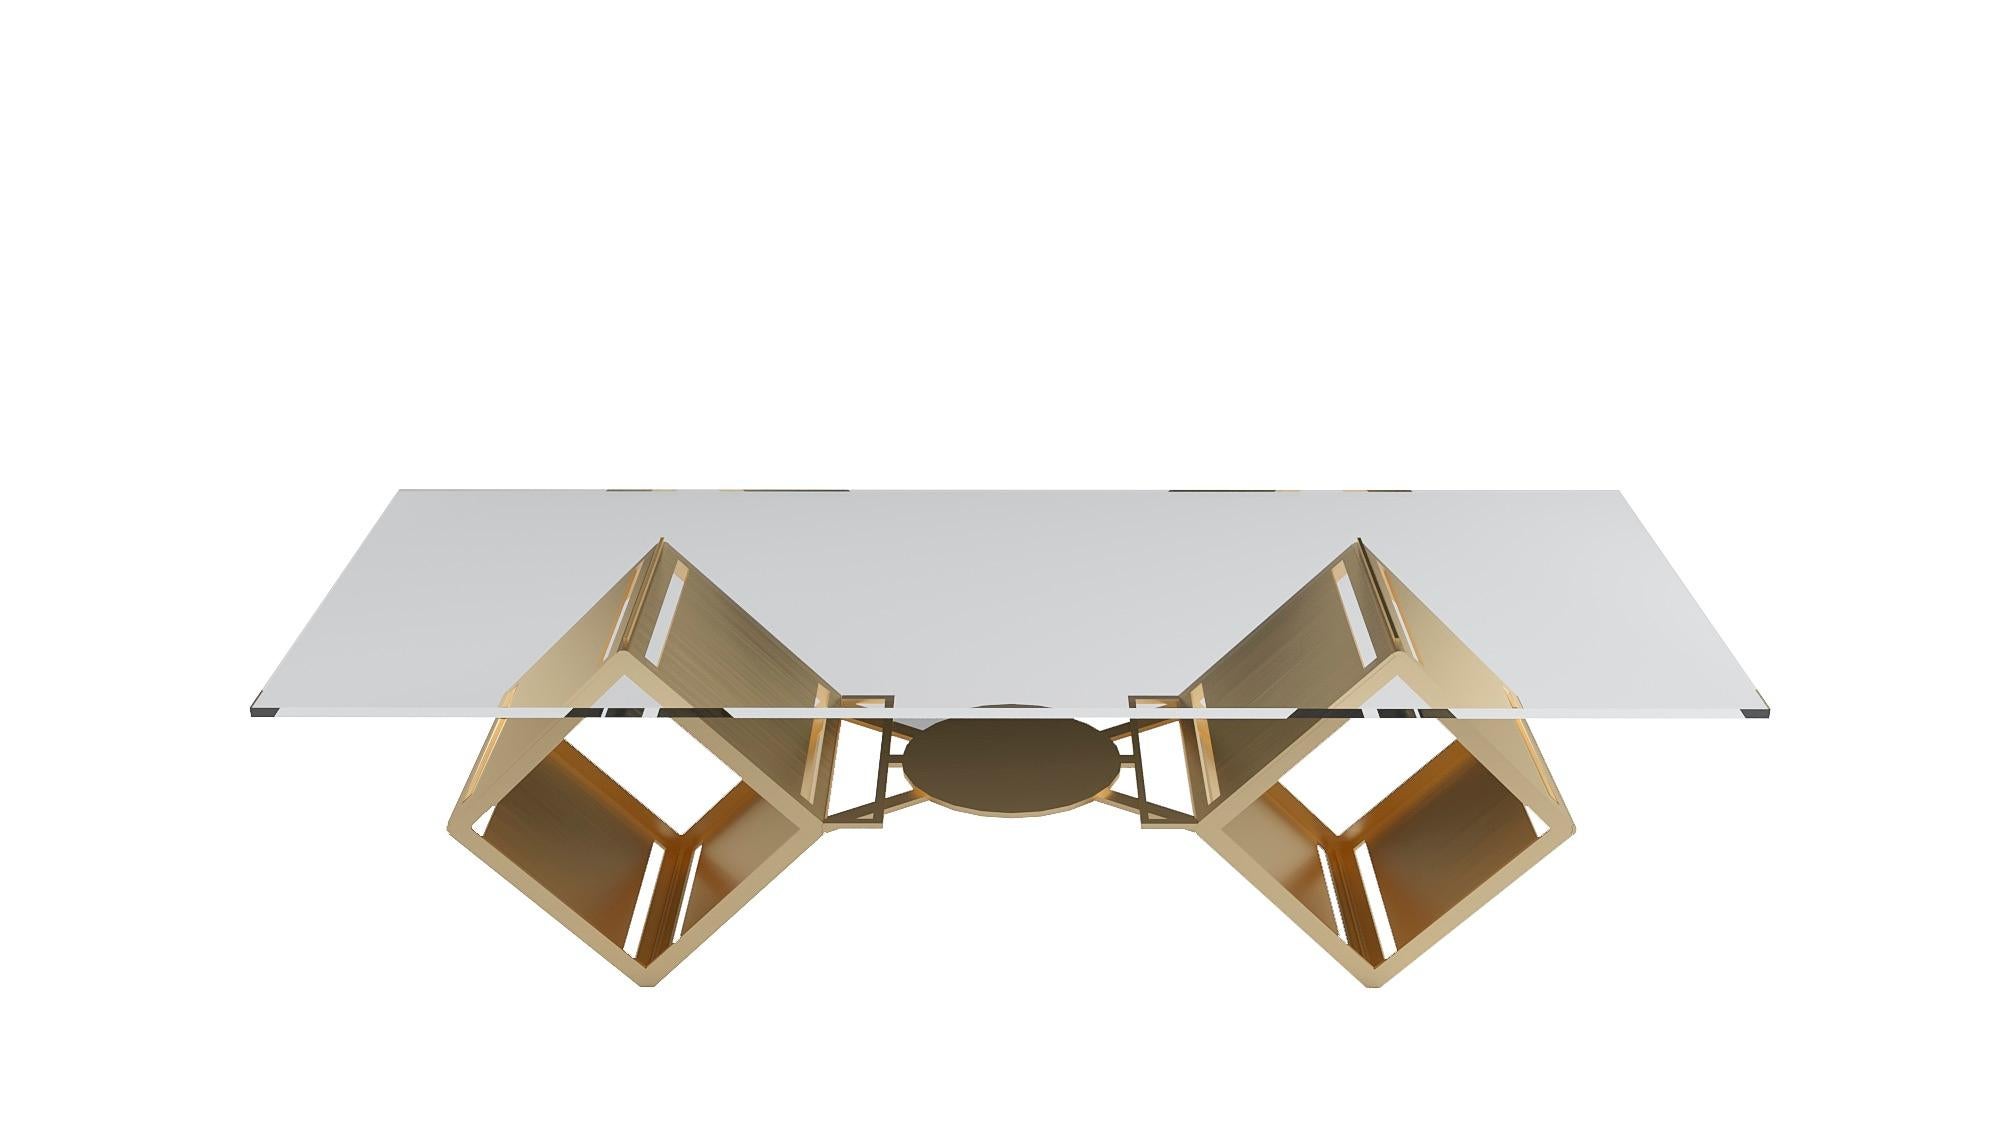 The Buckle table is fabricated in laser cut steel with a 1/2